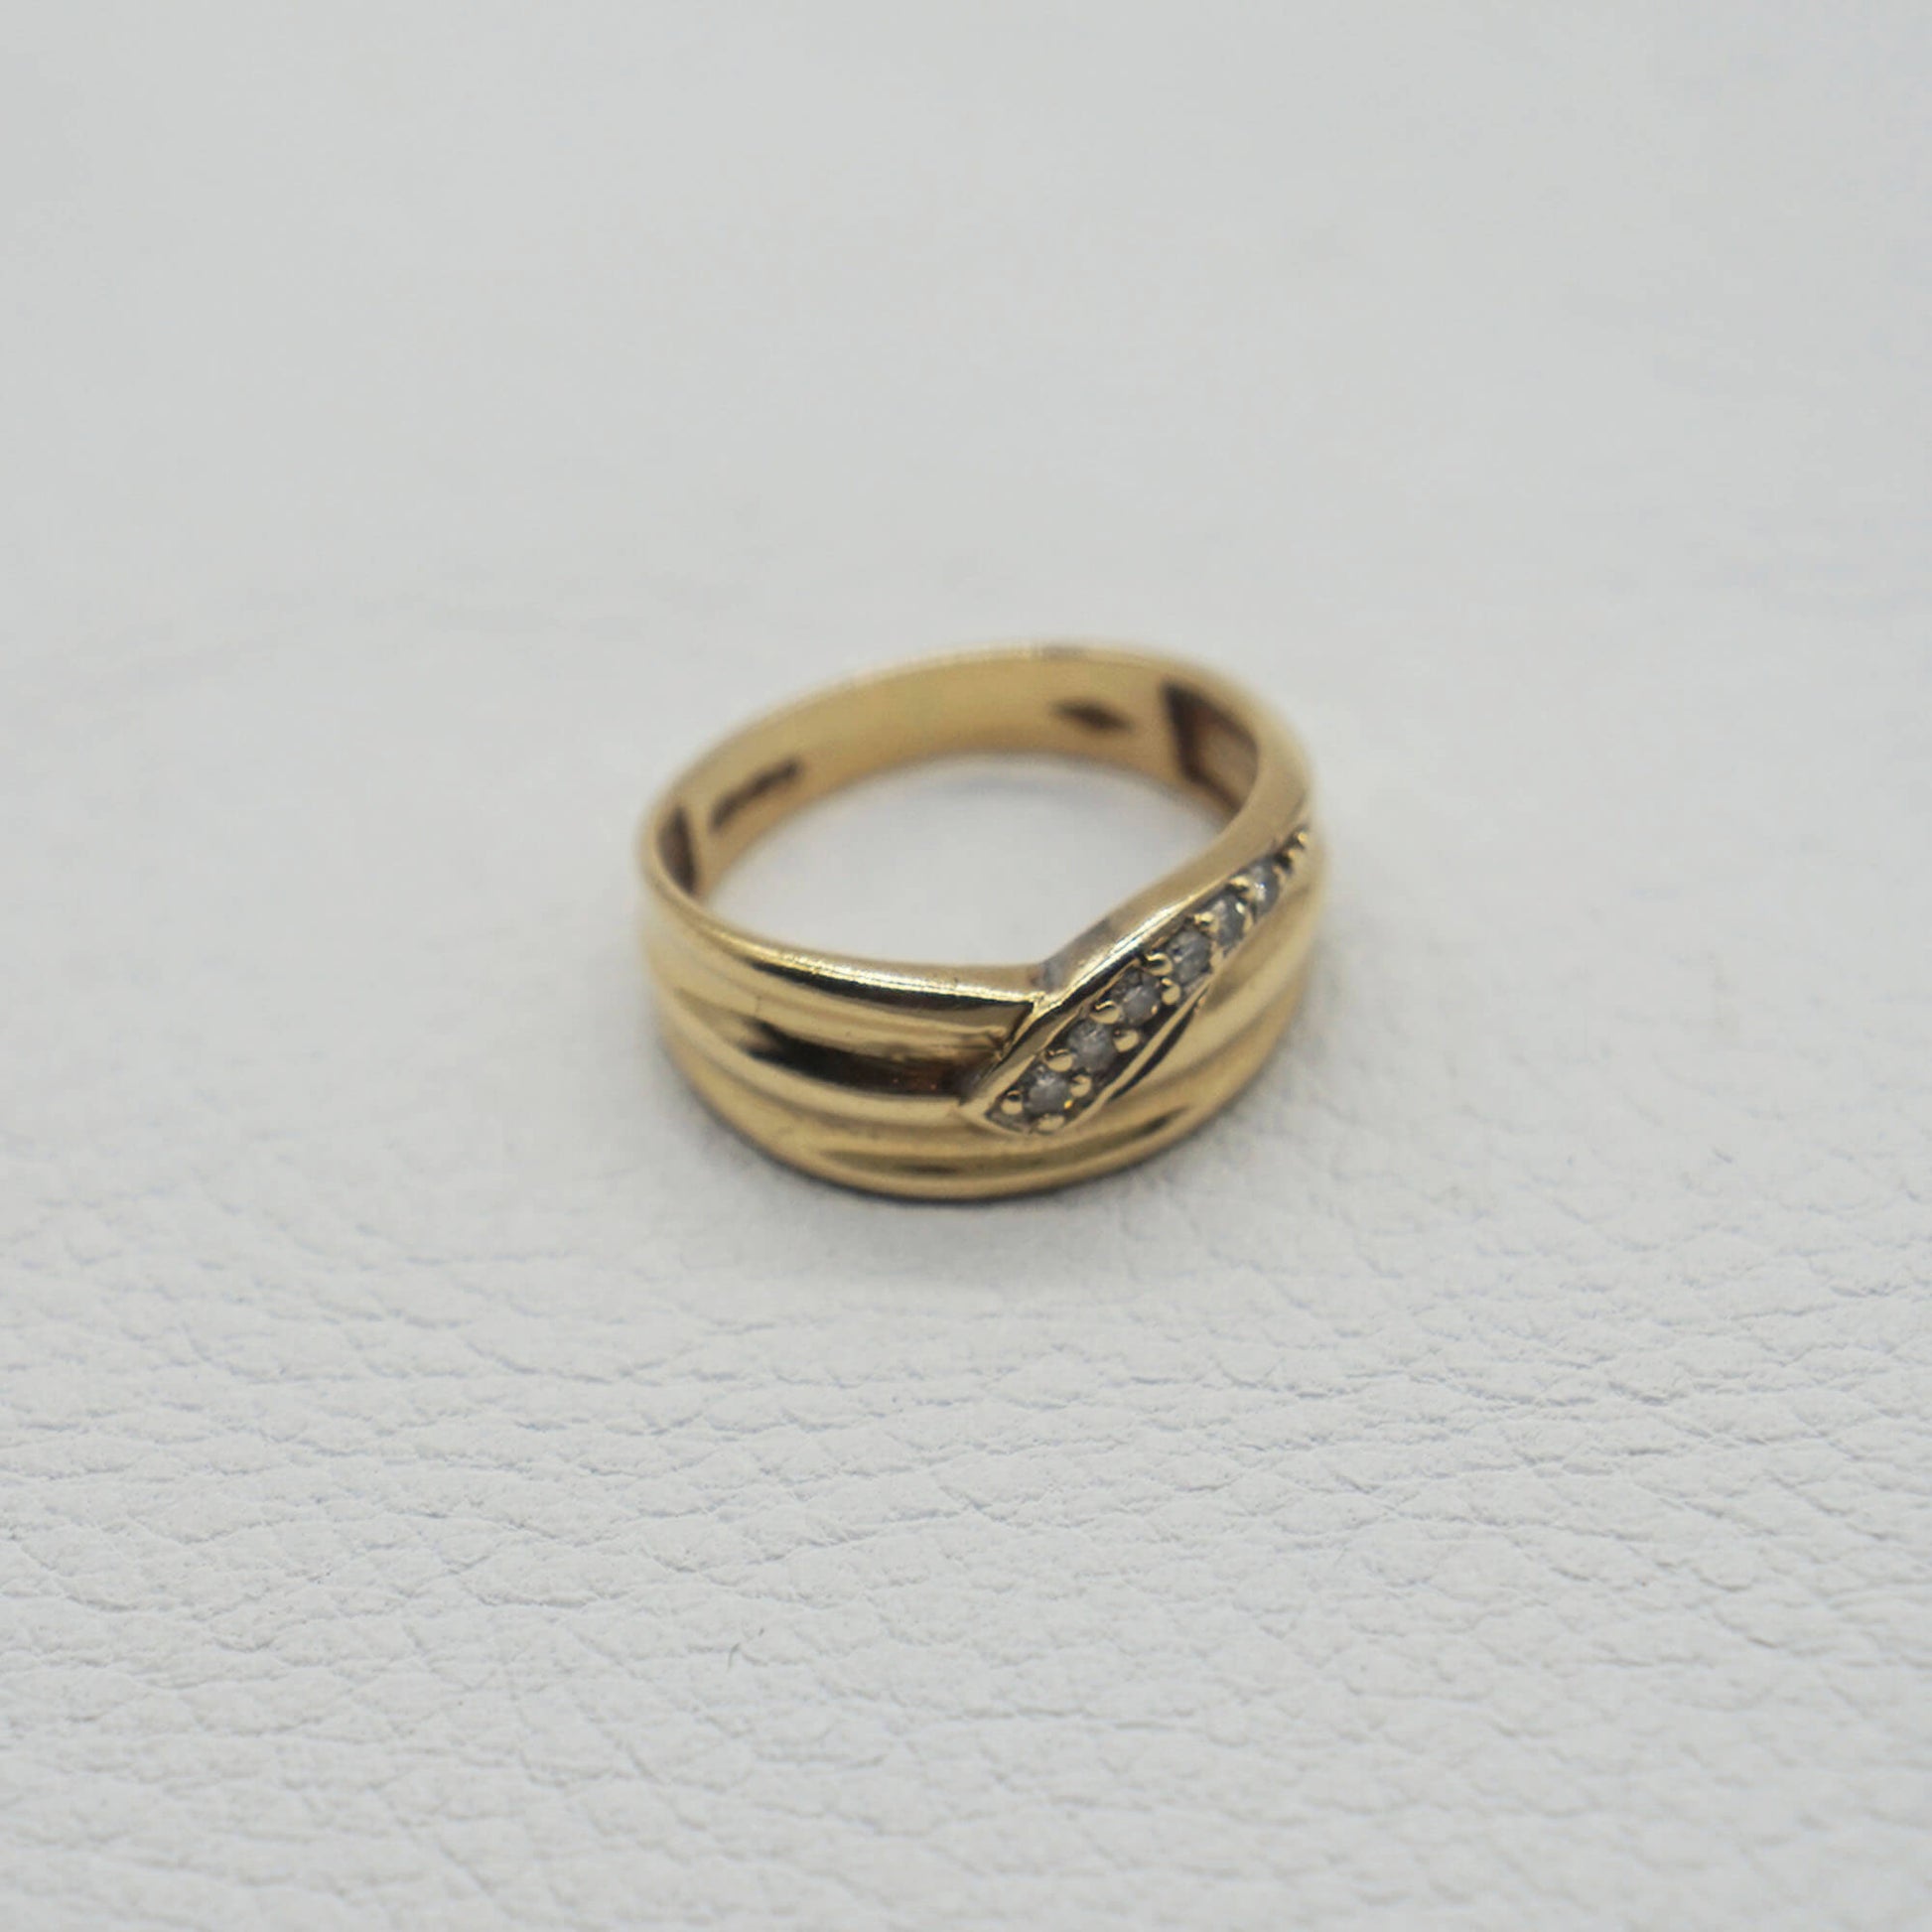 Vintage 9K Golf chunky ring with diamond wrap detail- hallmarks can be seen on inner band.